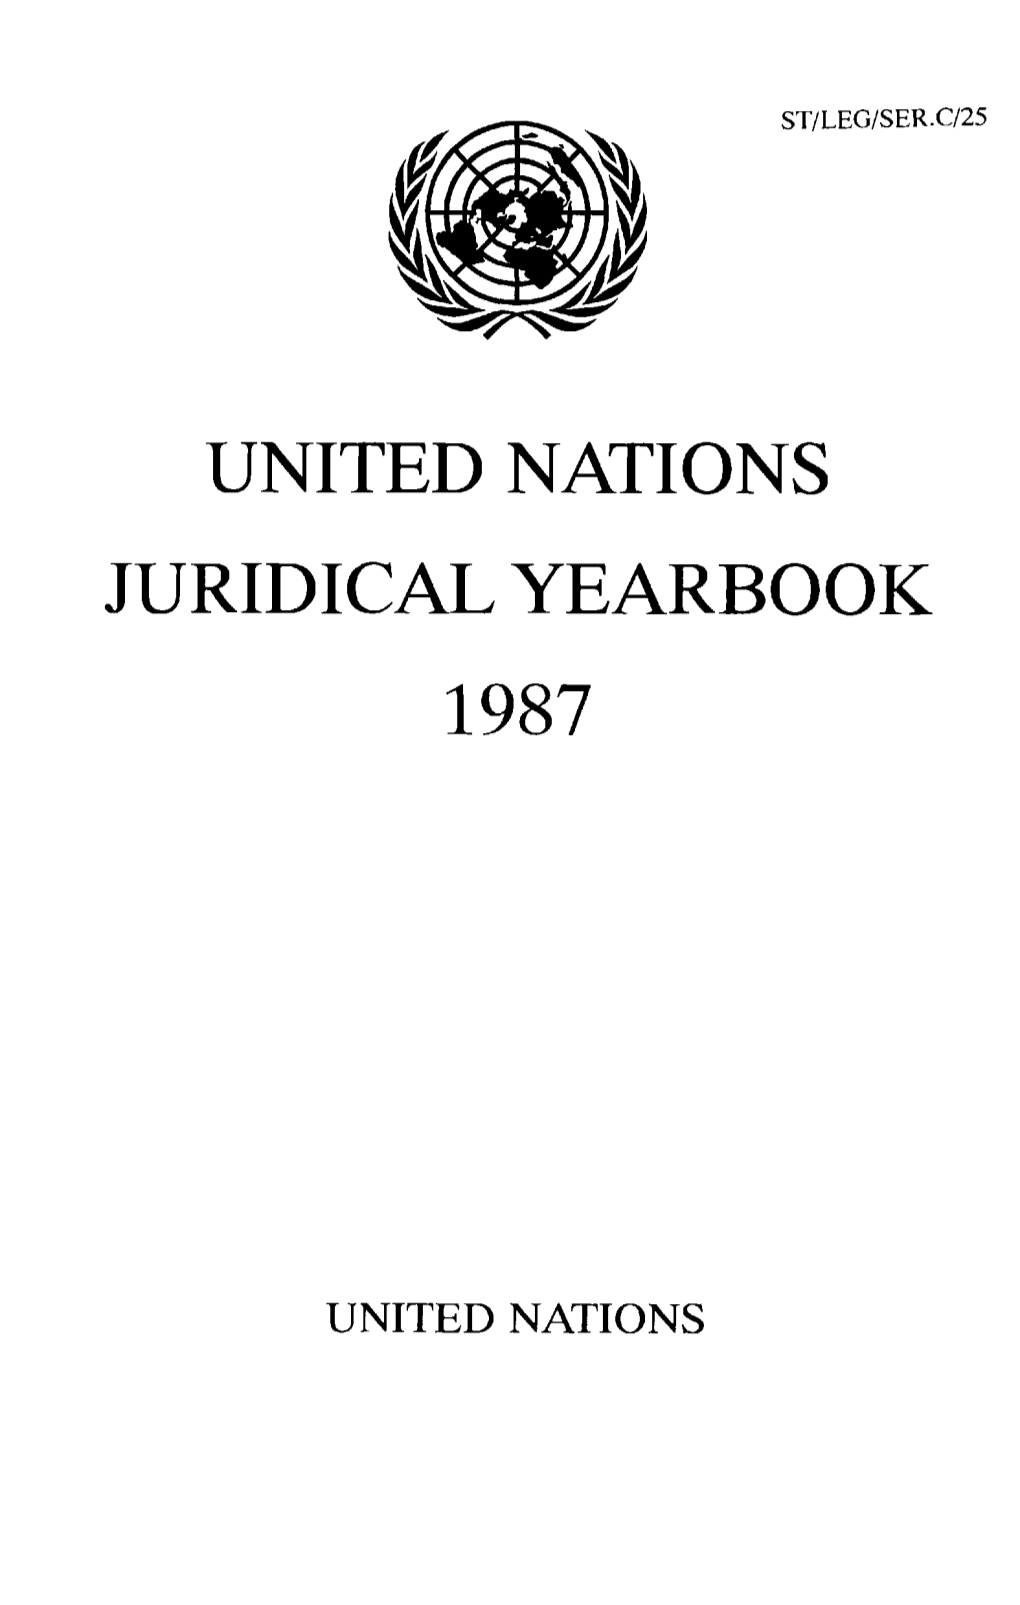 United Nations Juridical Yearbook 1987